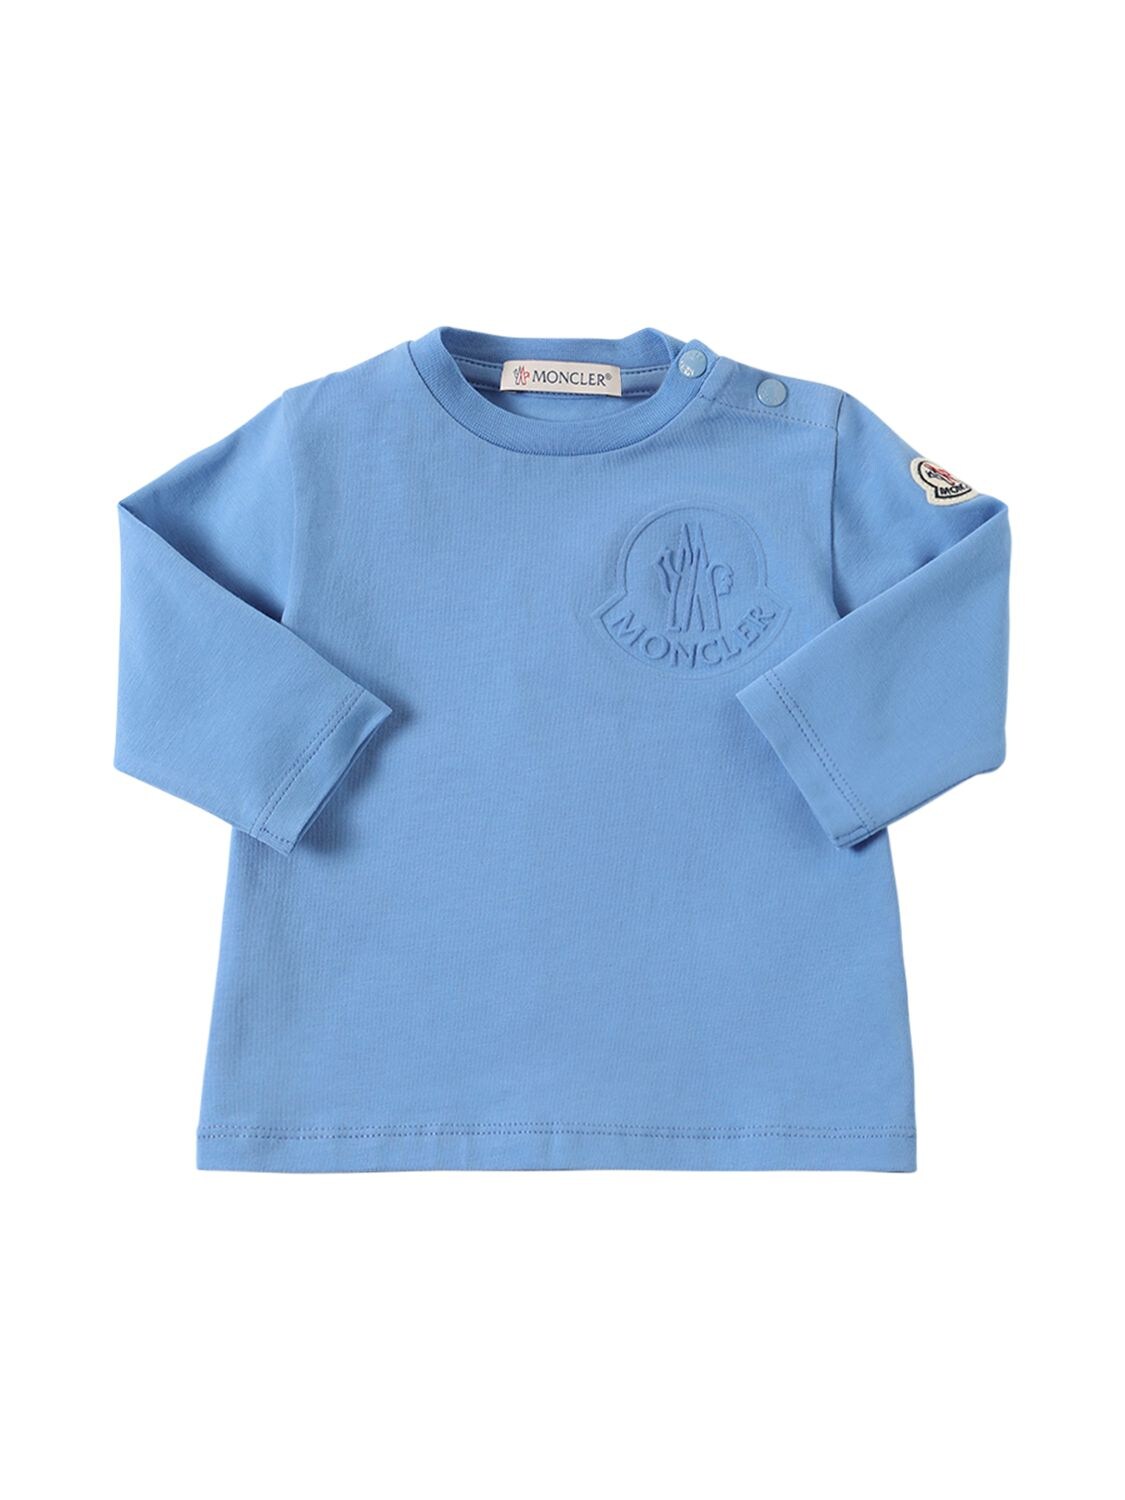 Moncler Kids' 棉质平纹针织长袖t恤 In Pastel Blue